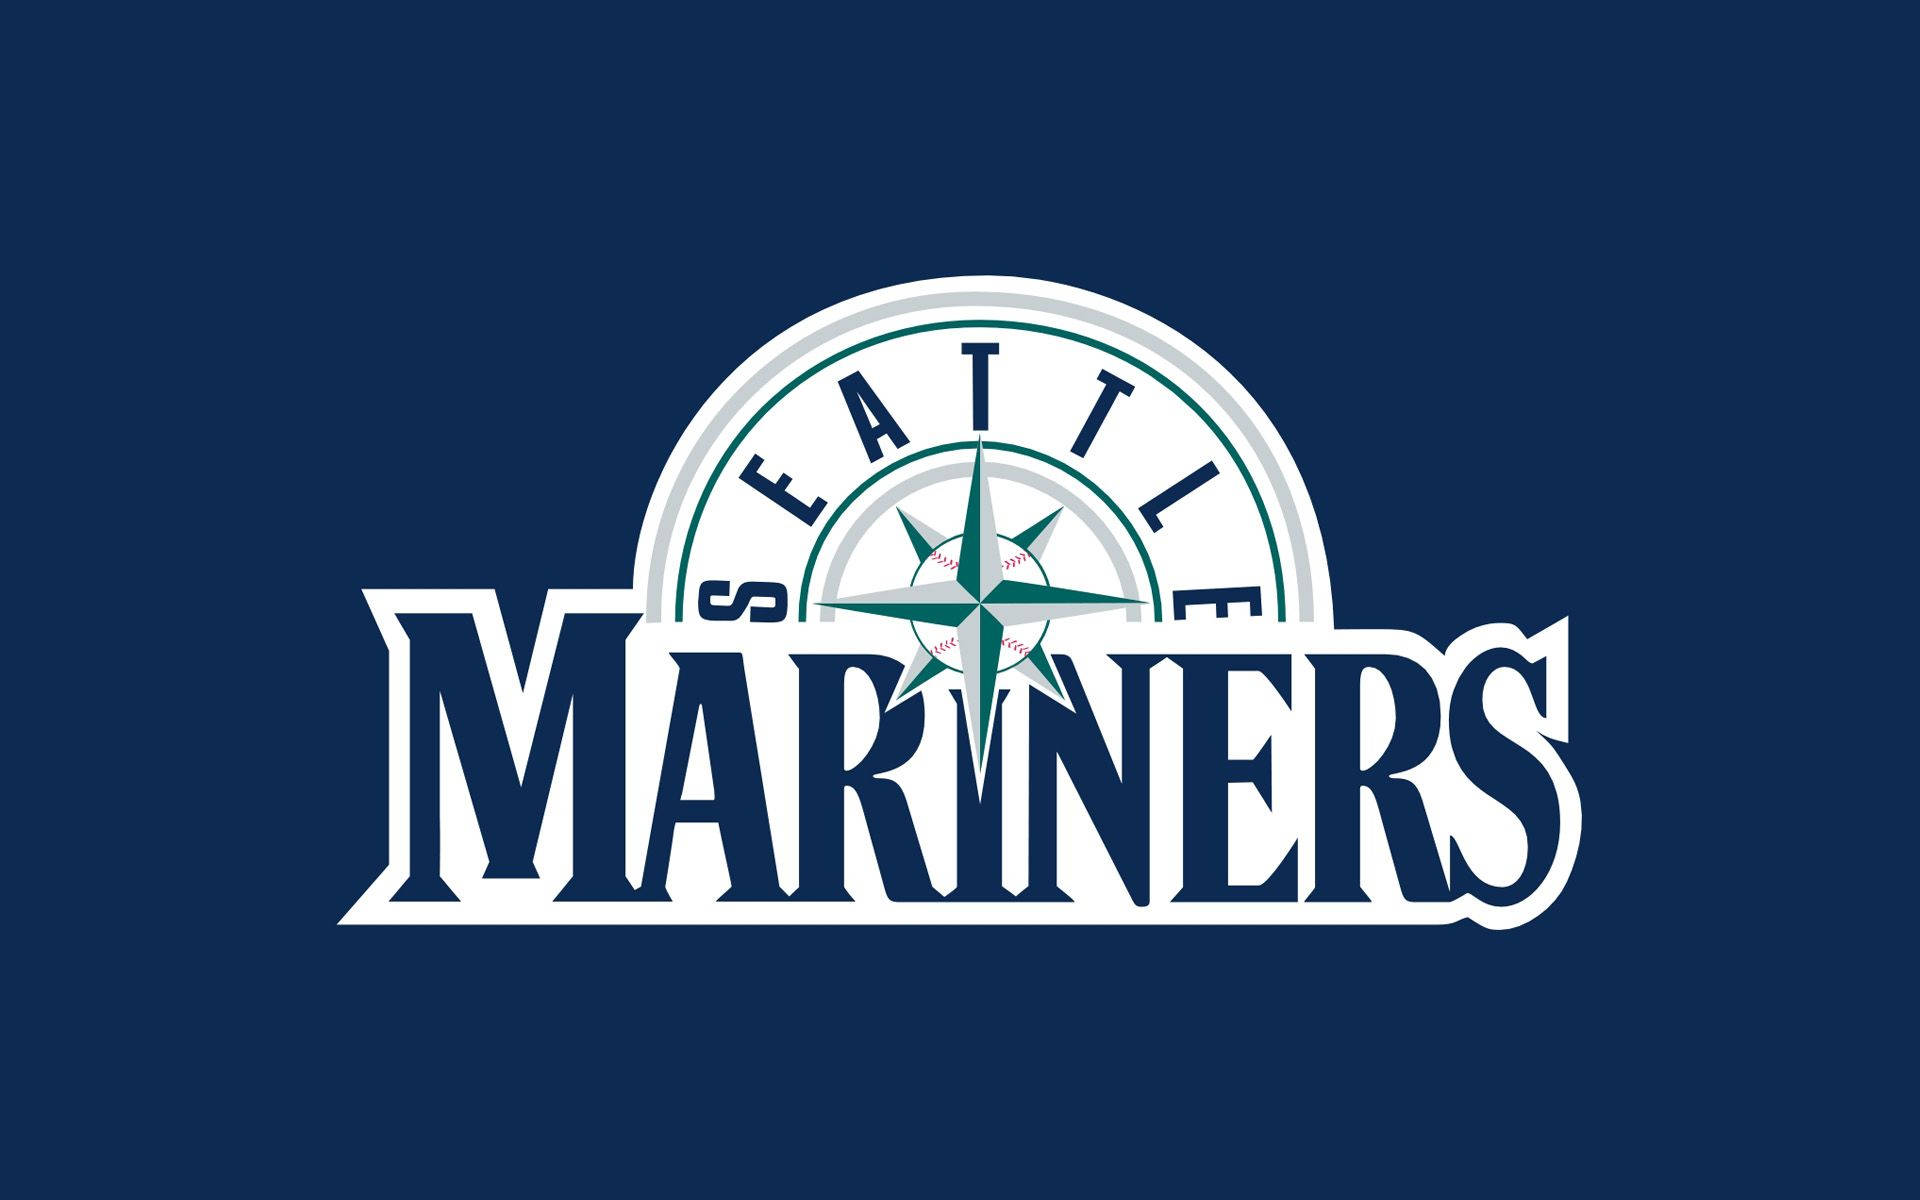 Seattle Mariners In Navy Blue